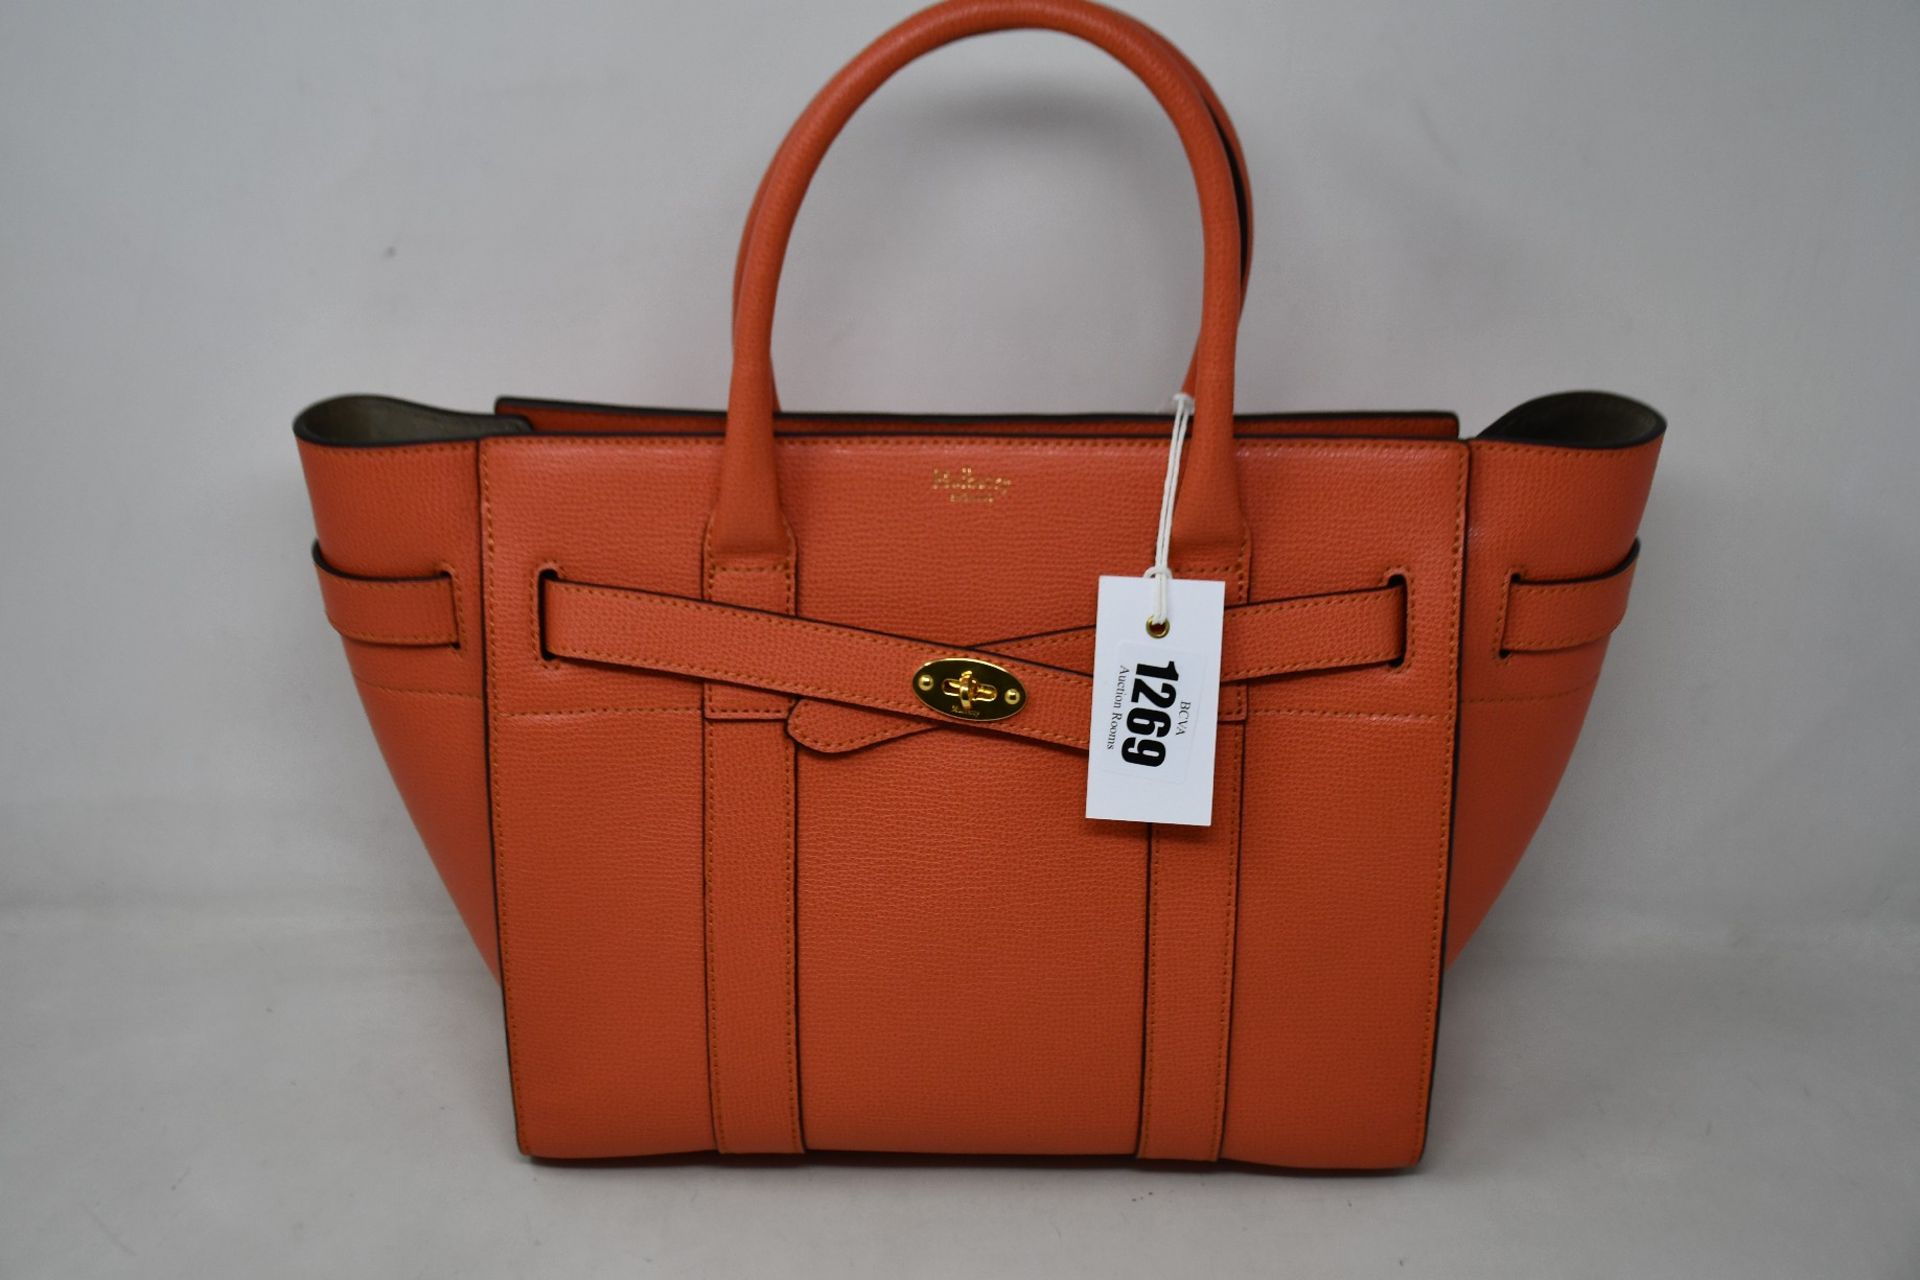 An as new Mulberry Bayswater small zipped bag in coral rose (RRP £715).